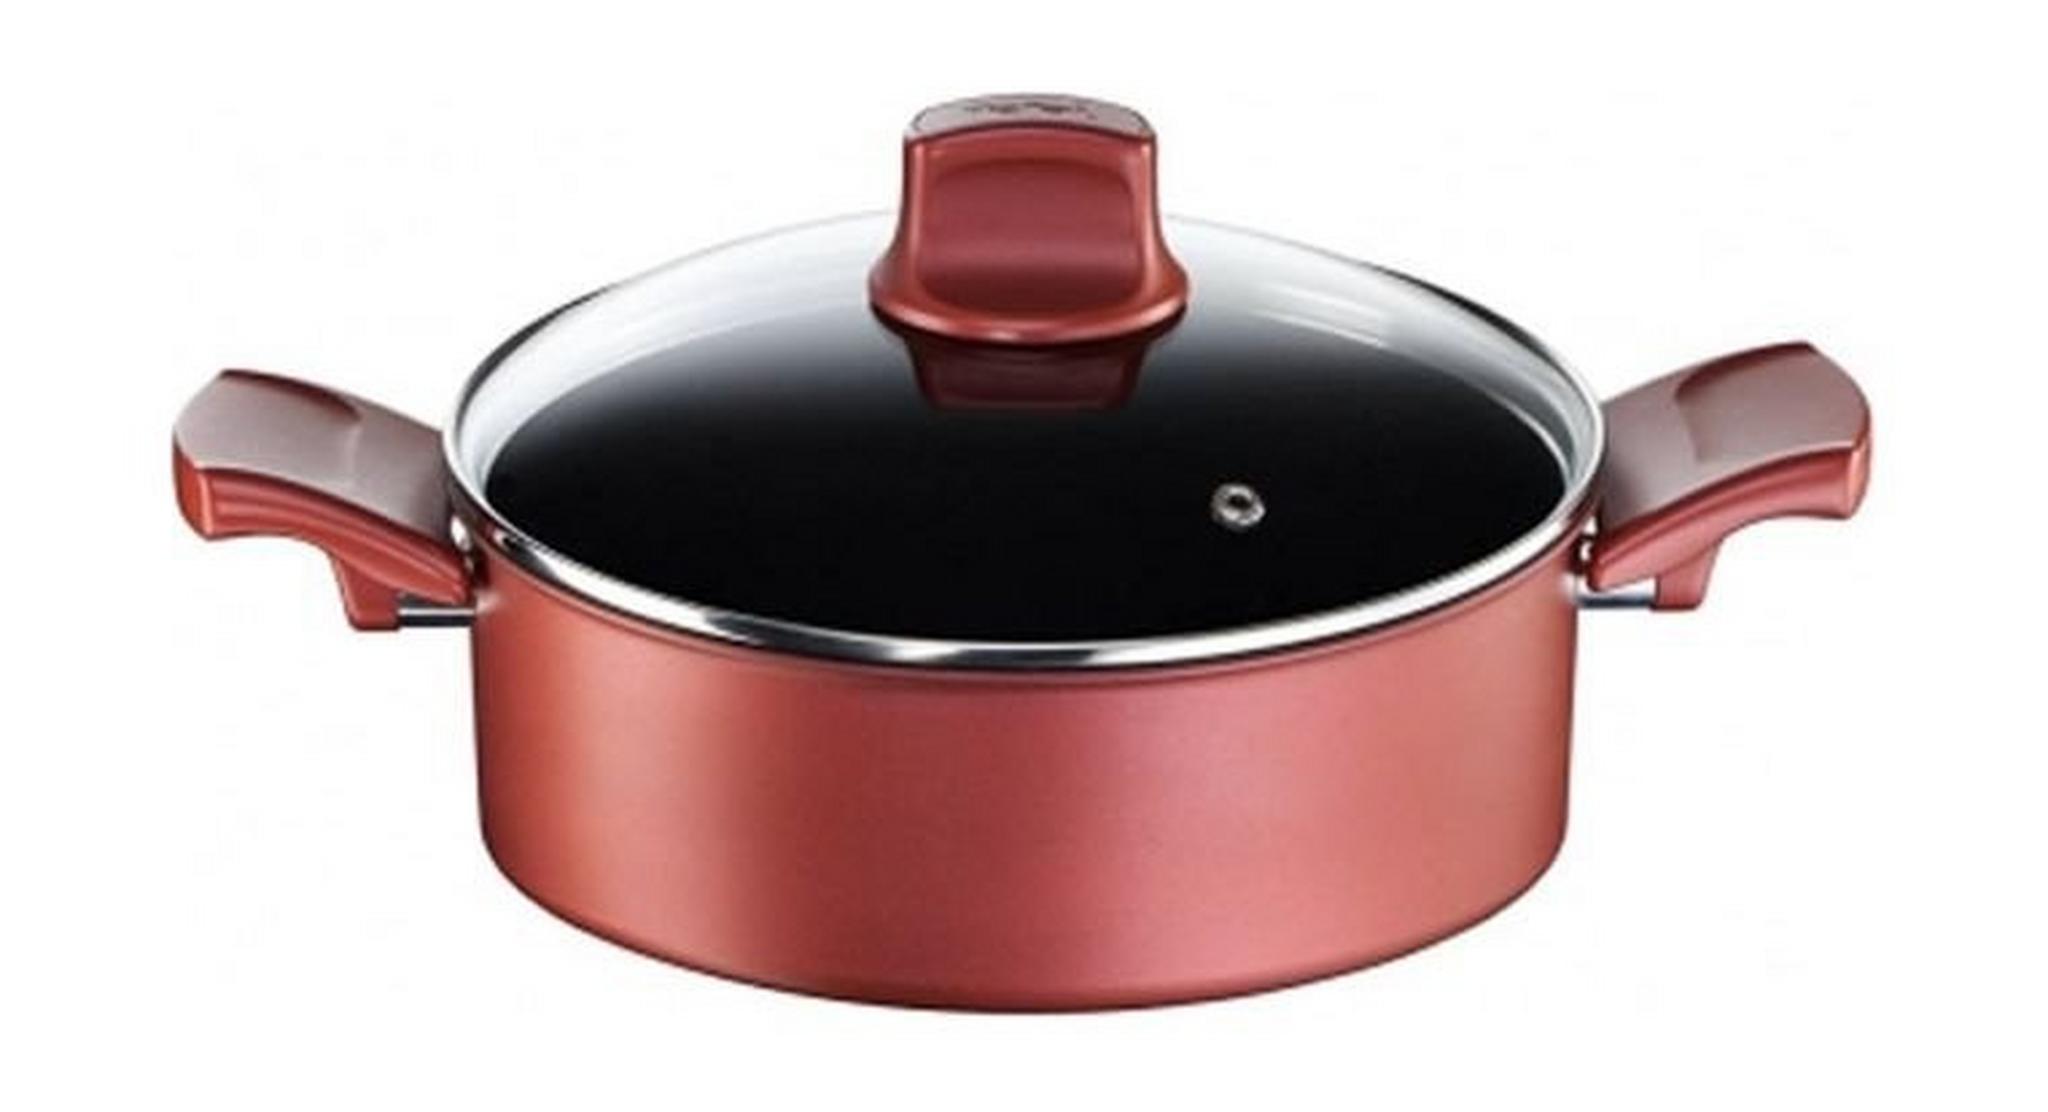 Tefal 20cm Character Dutch Oven Pot - Rio Red